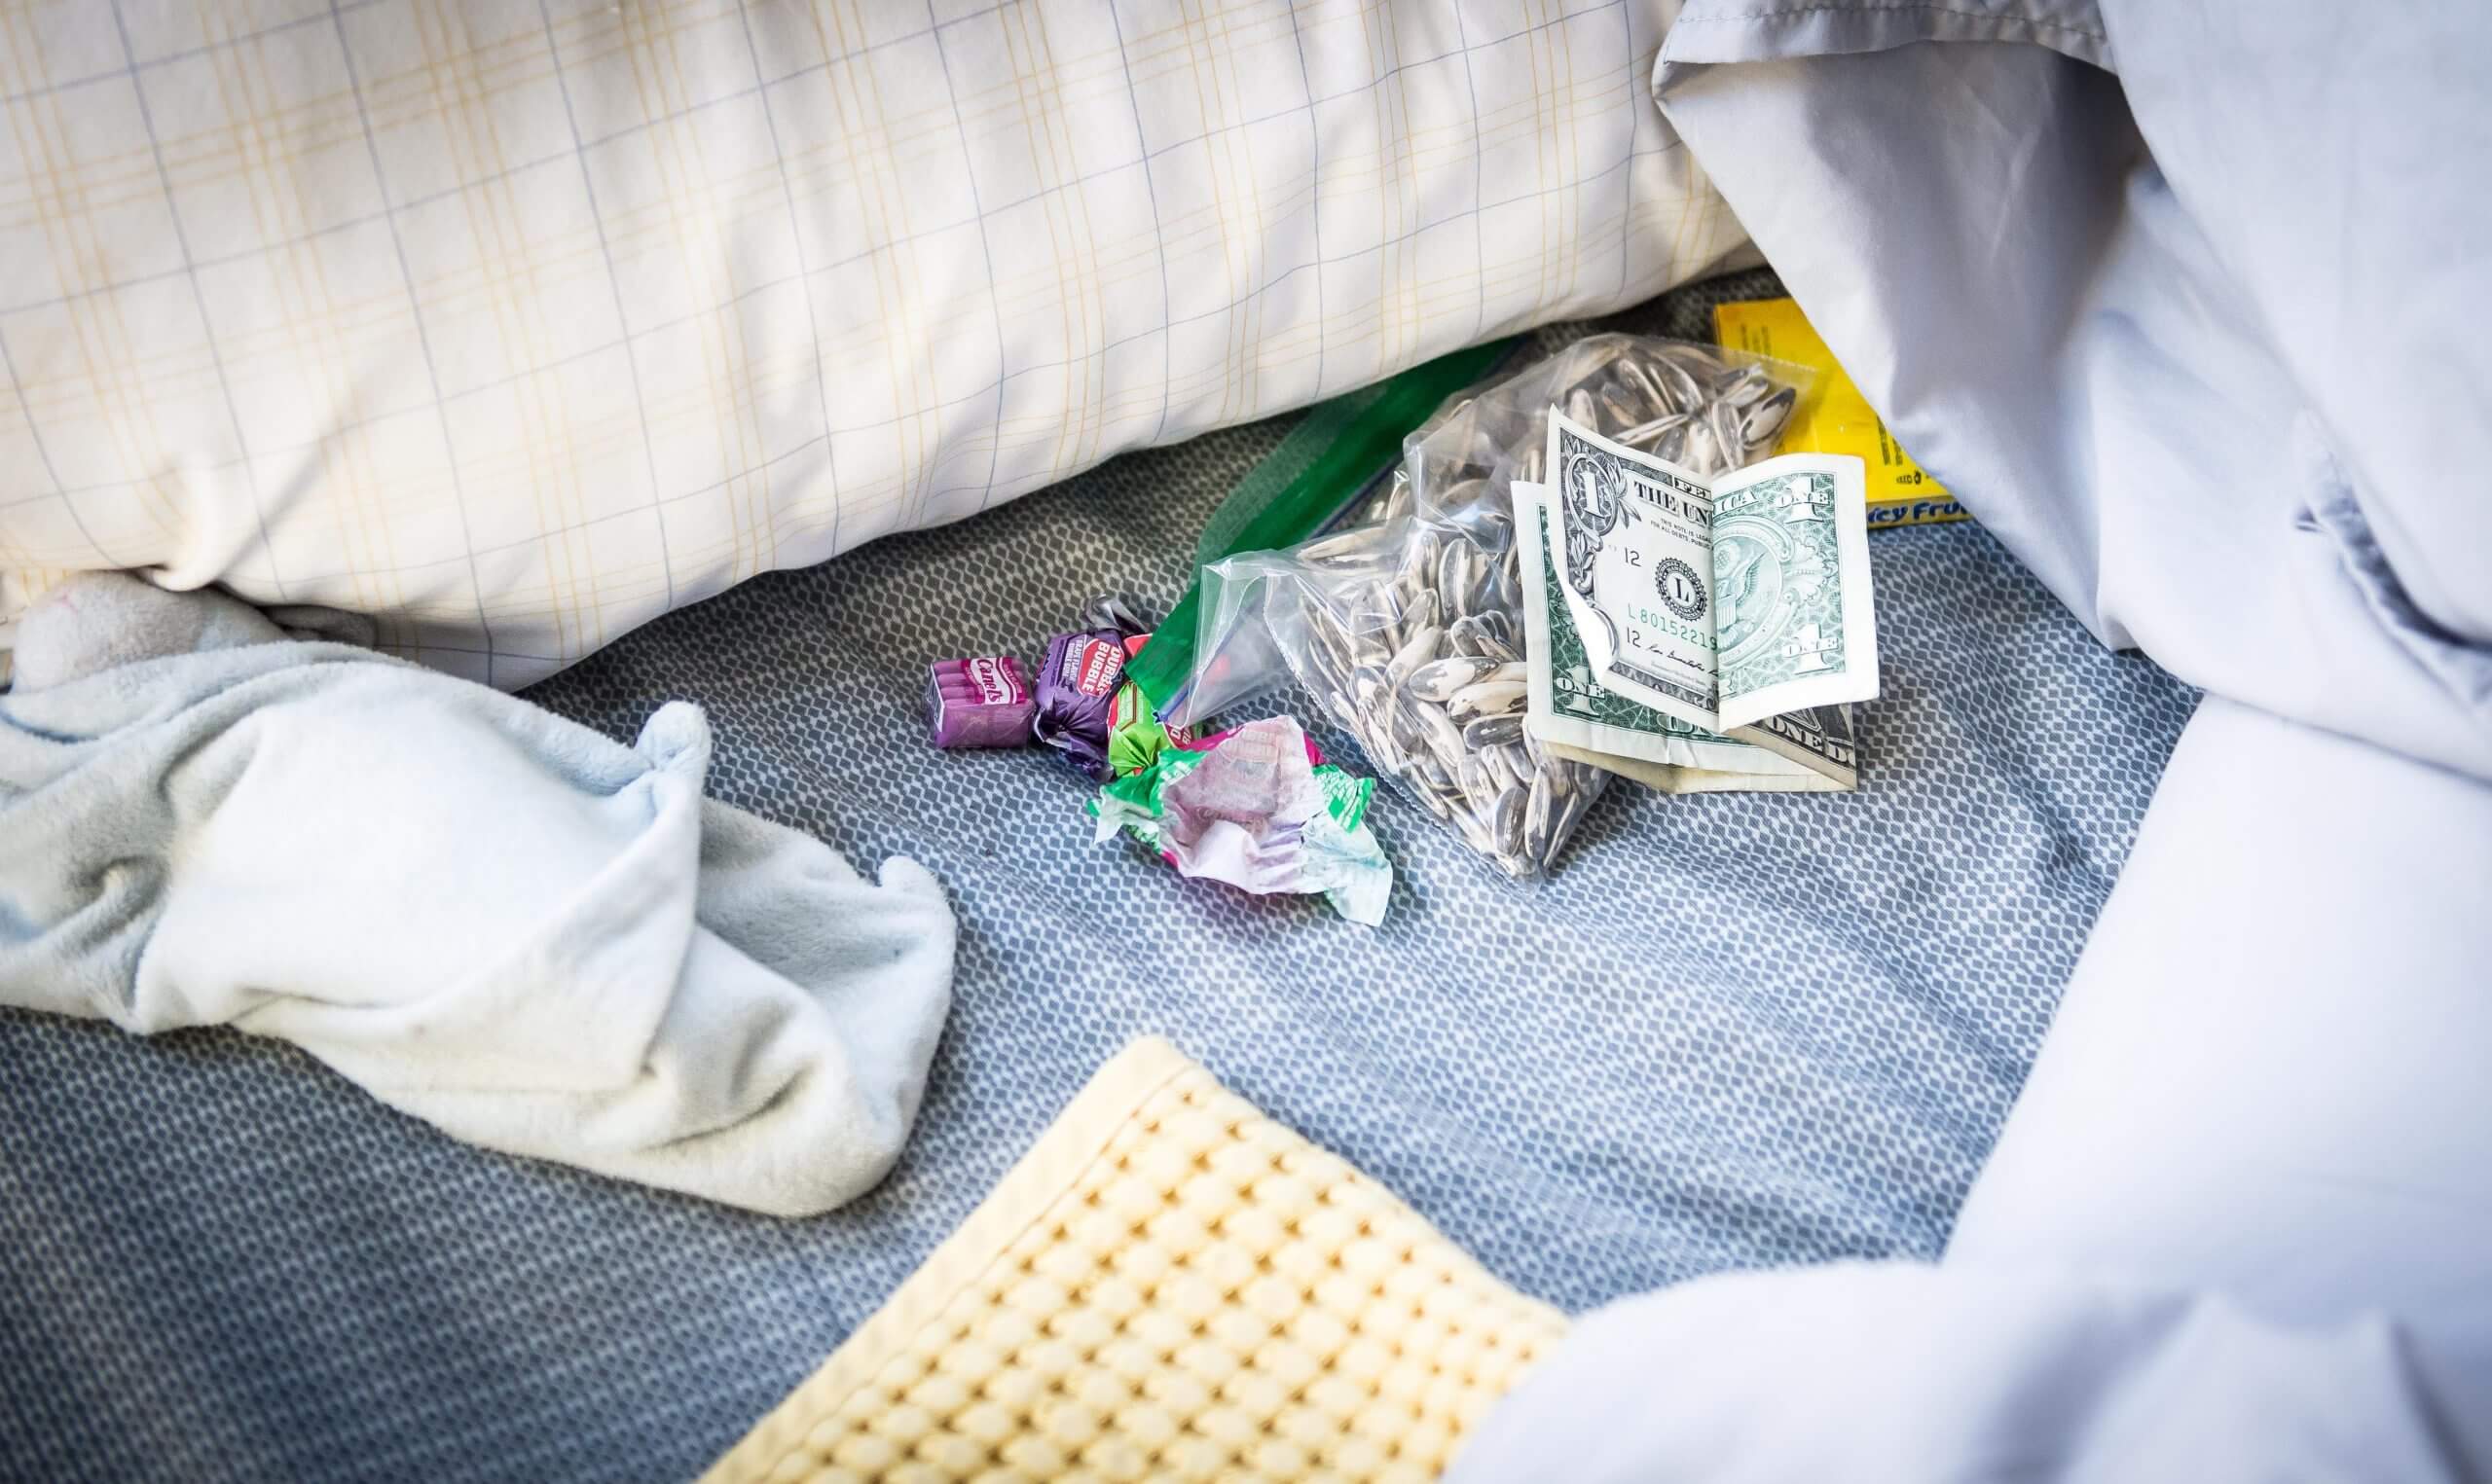 Several items on a bed include cash, candy, and a bag of sunflower seeds.